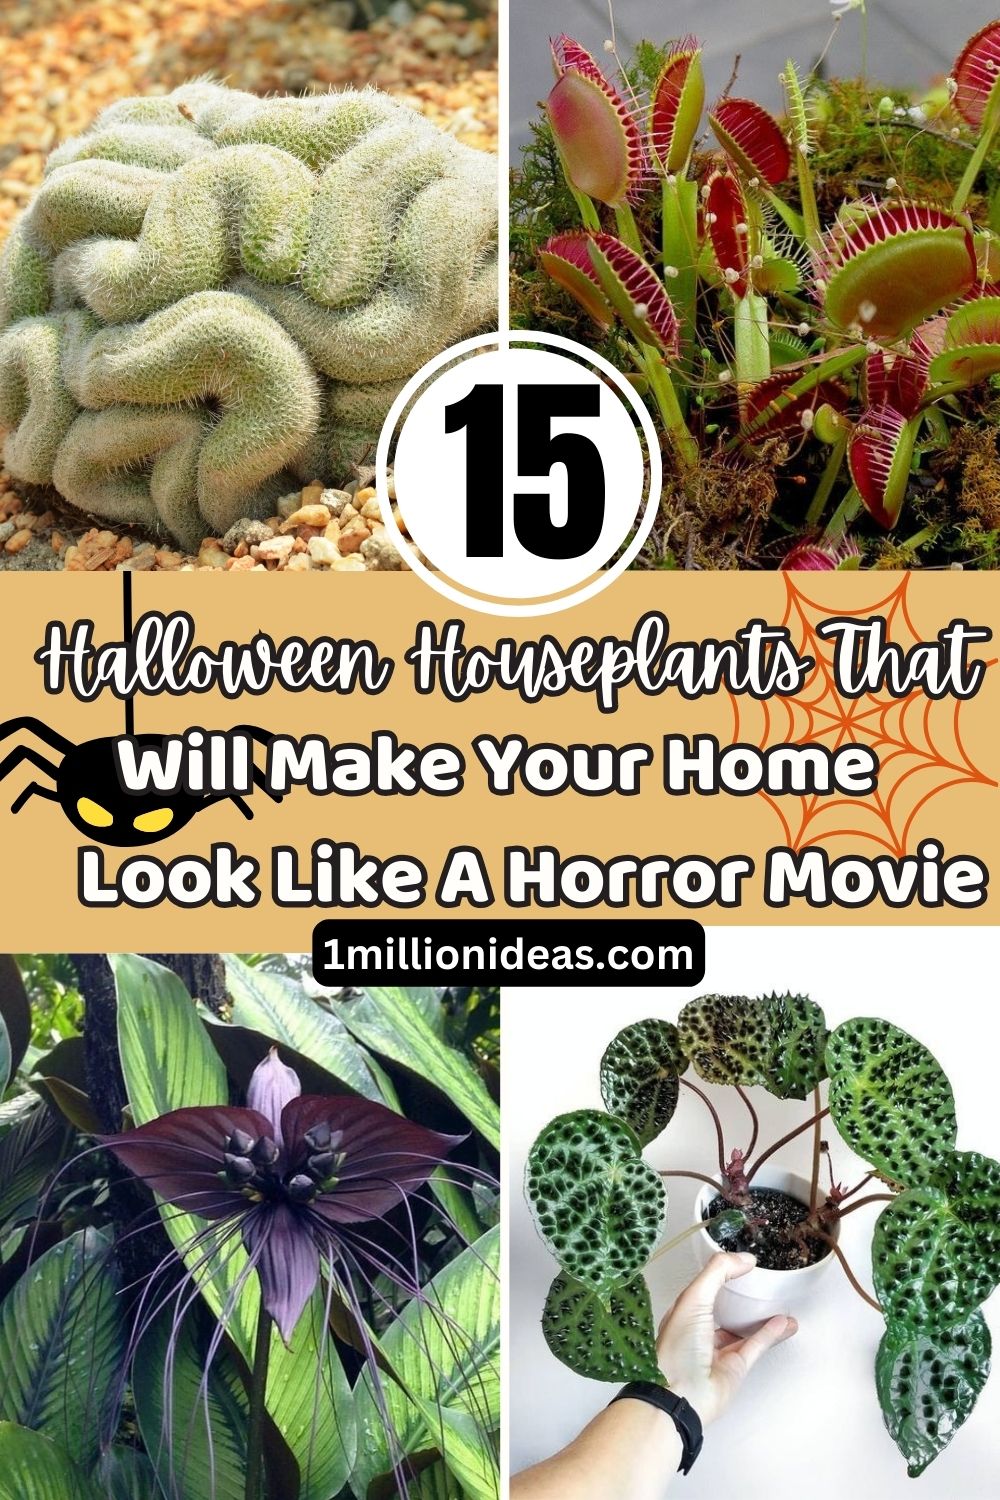 15 Halloween Houseplants That Will Make Your Home Look Like A Horror Movie